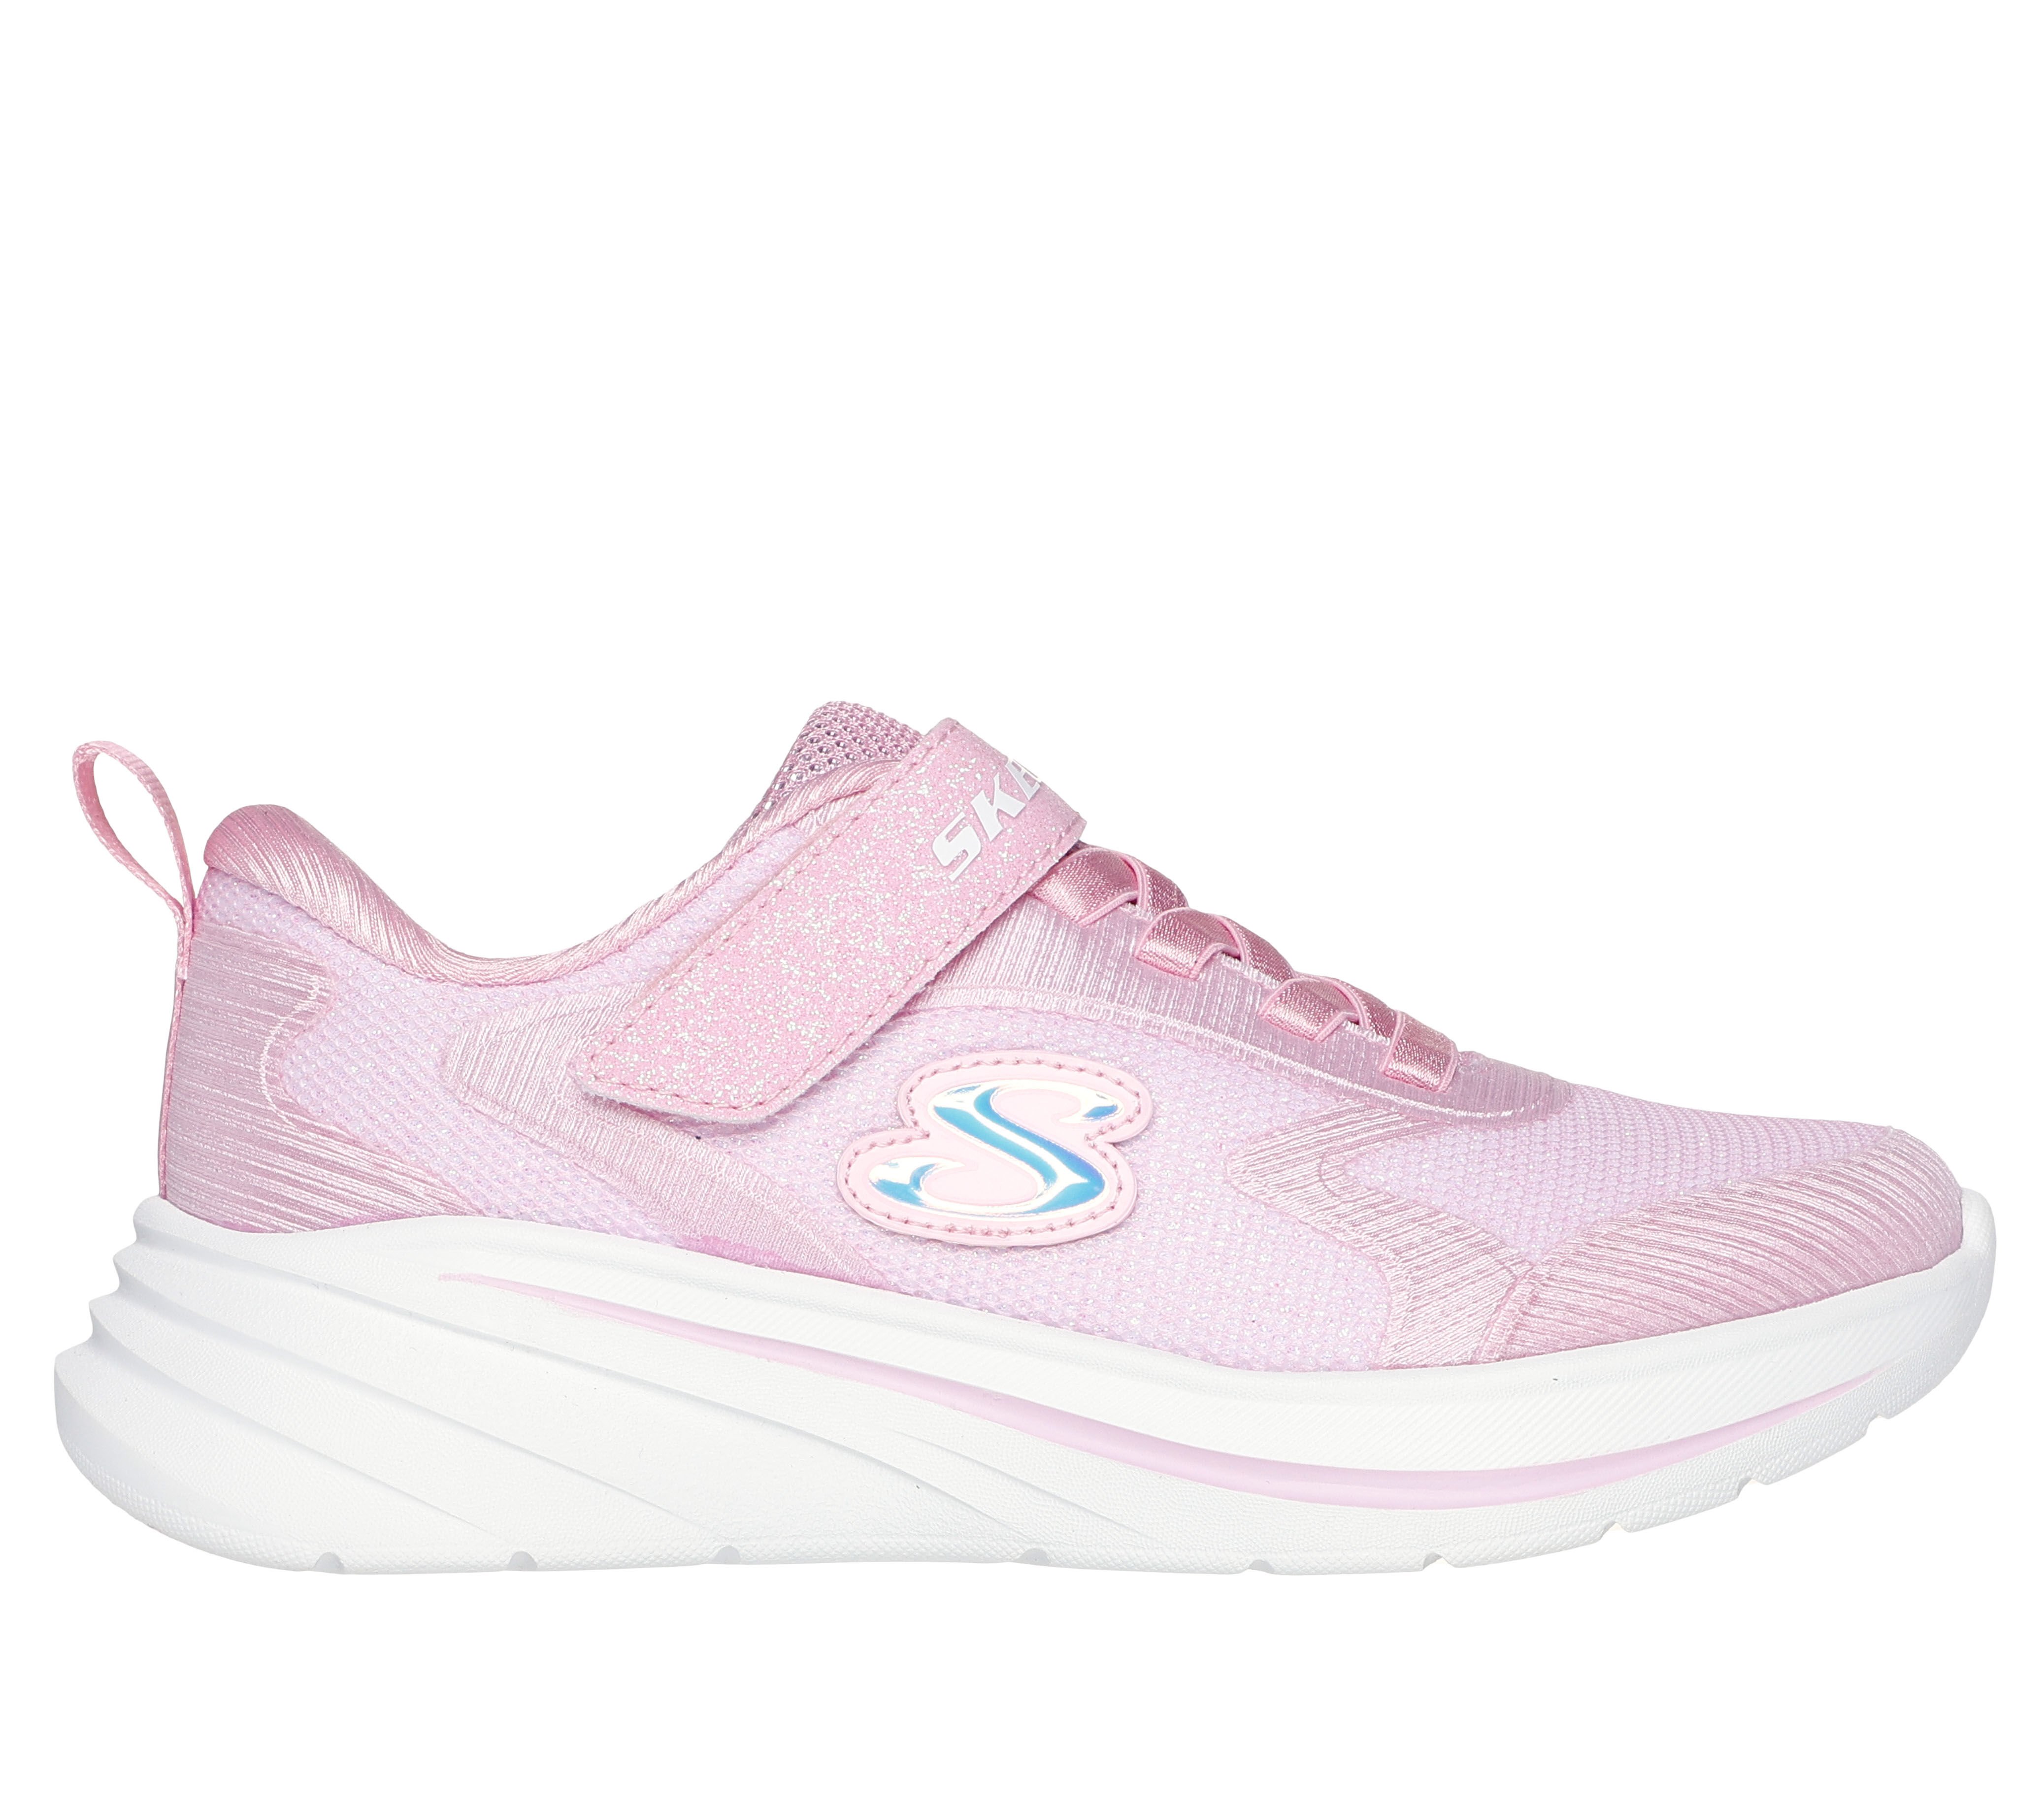 Shop Girls' Athletic Shoes | Girls' Running & Gym Shoes | SKECHERS